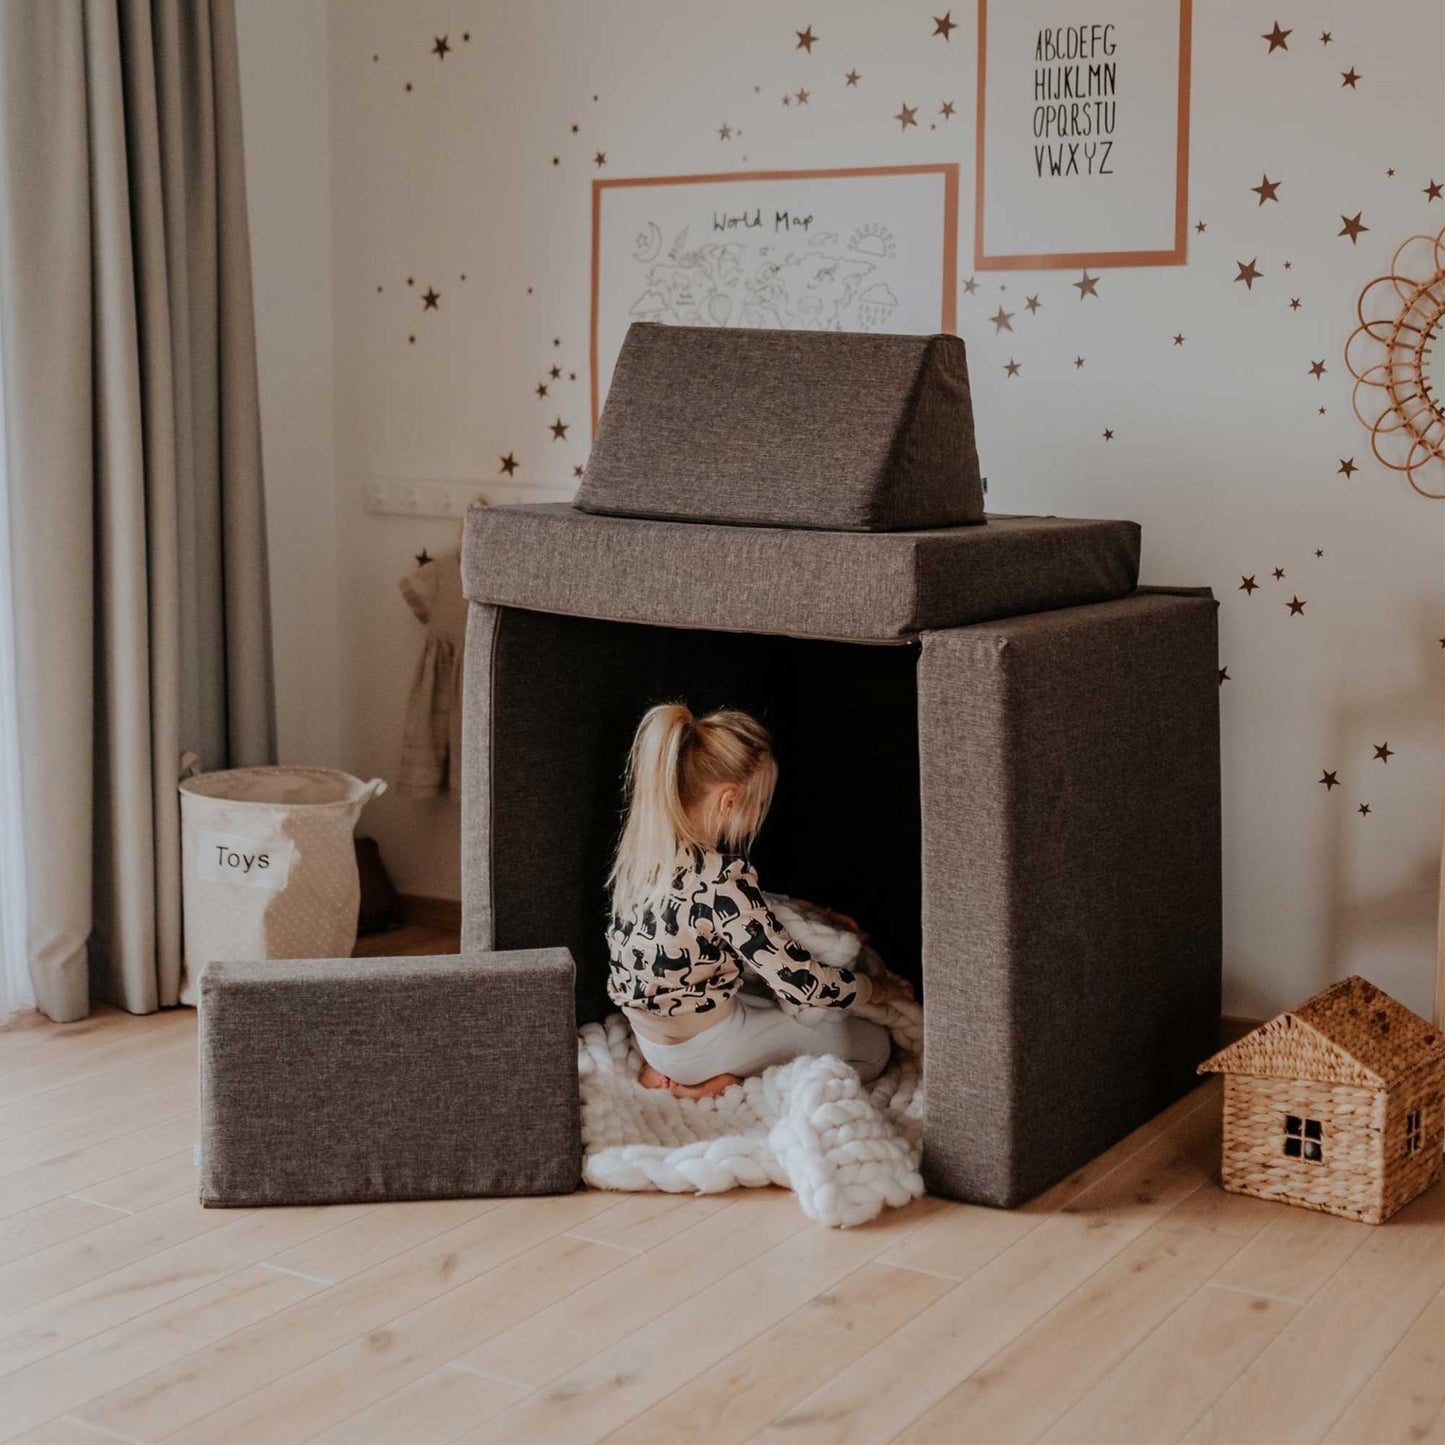 A little girl sitting in a play house in her room, surrounded by a Sweet HOME from wood activity play couch set for kids.